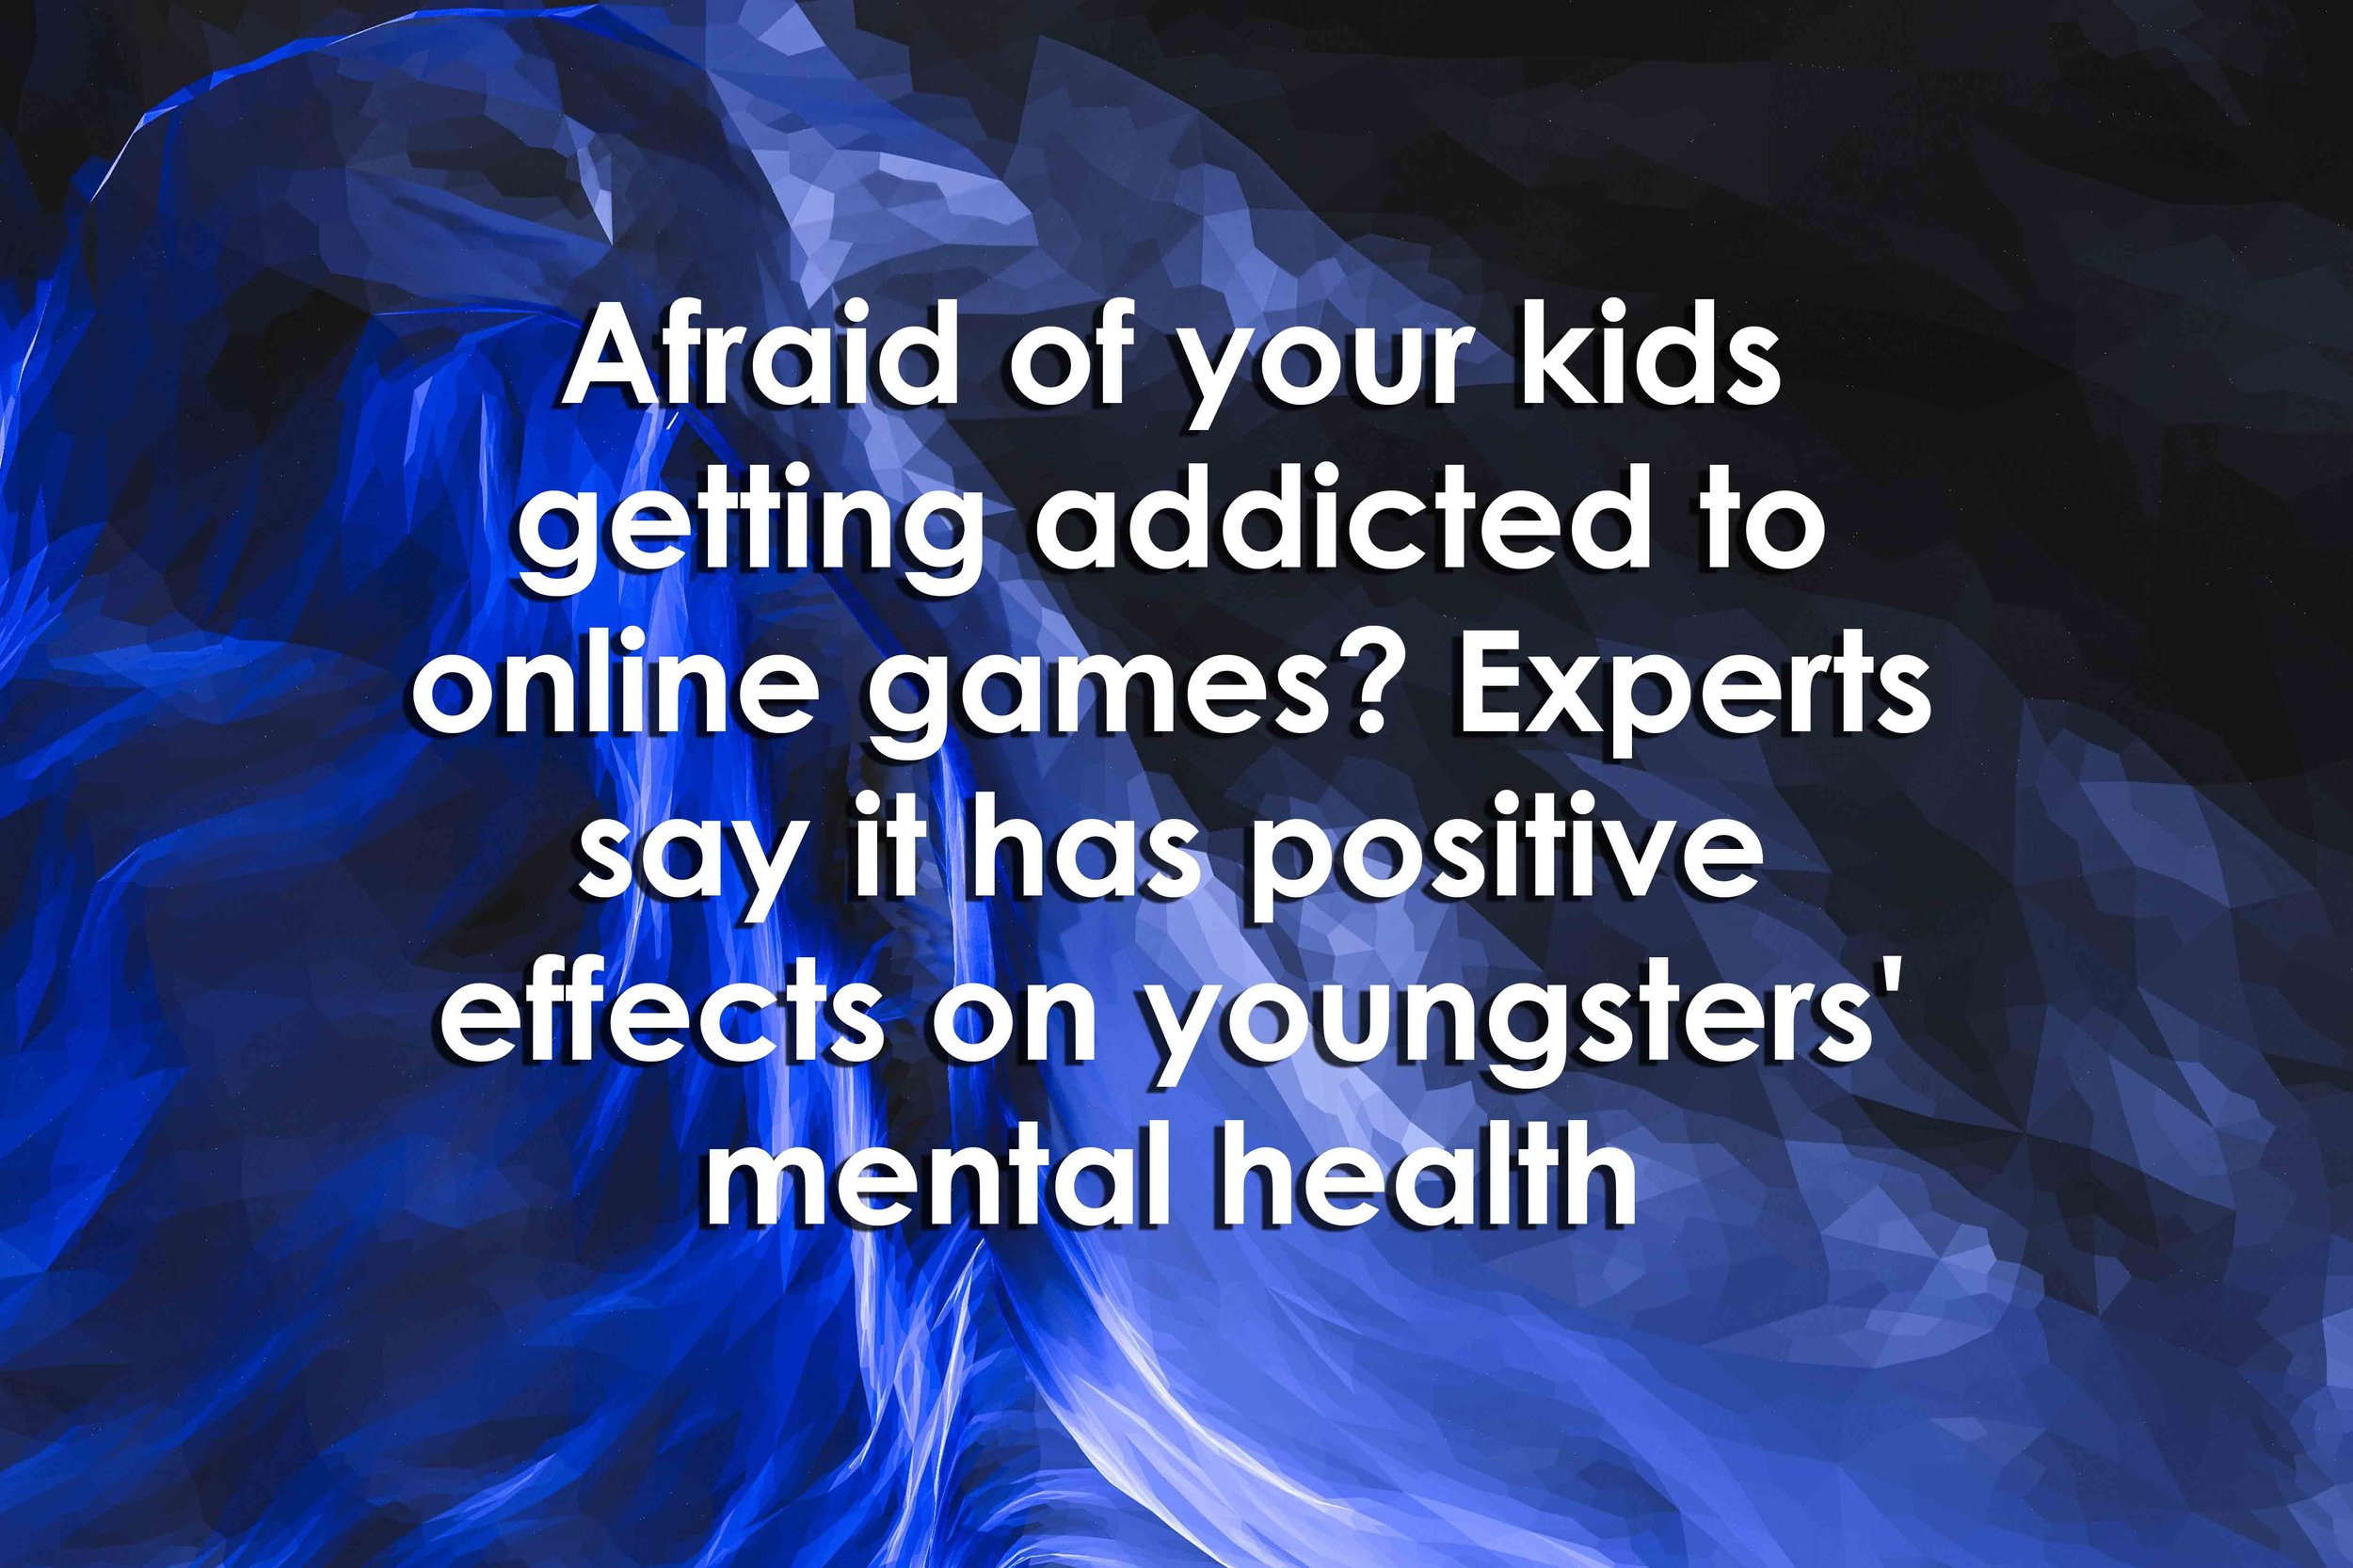 Effects of online games